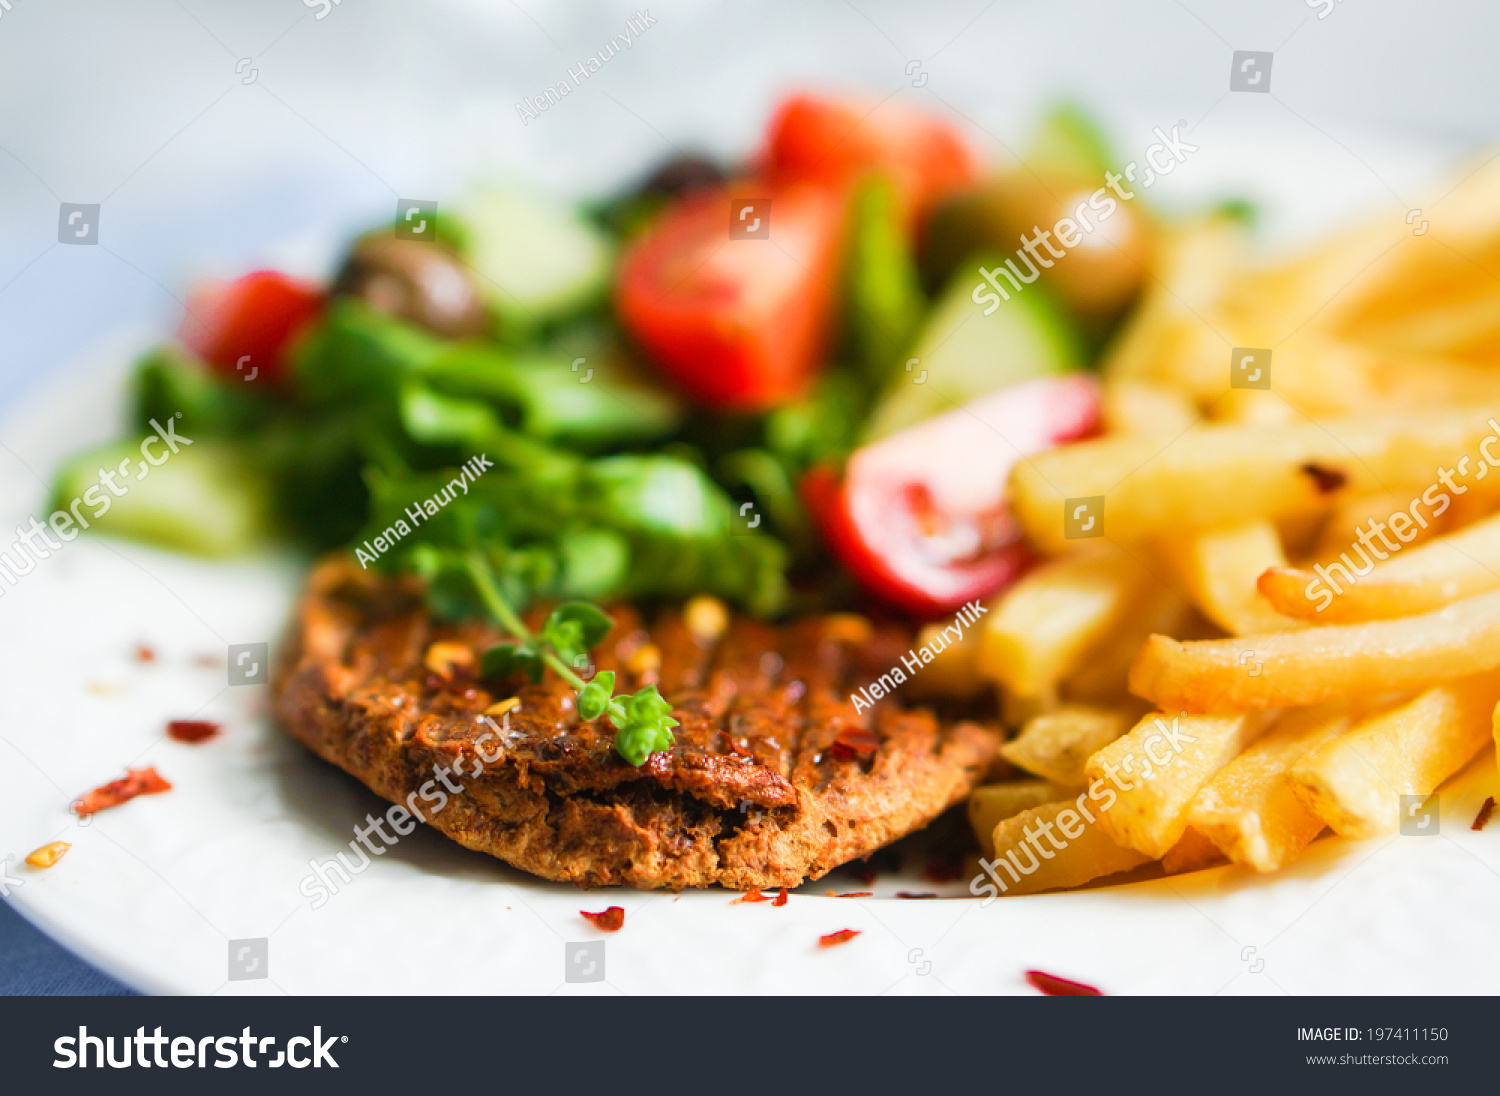 Steak with french fries and salad #197411150